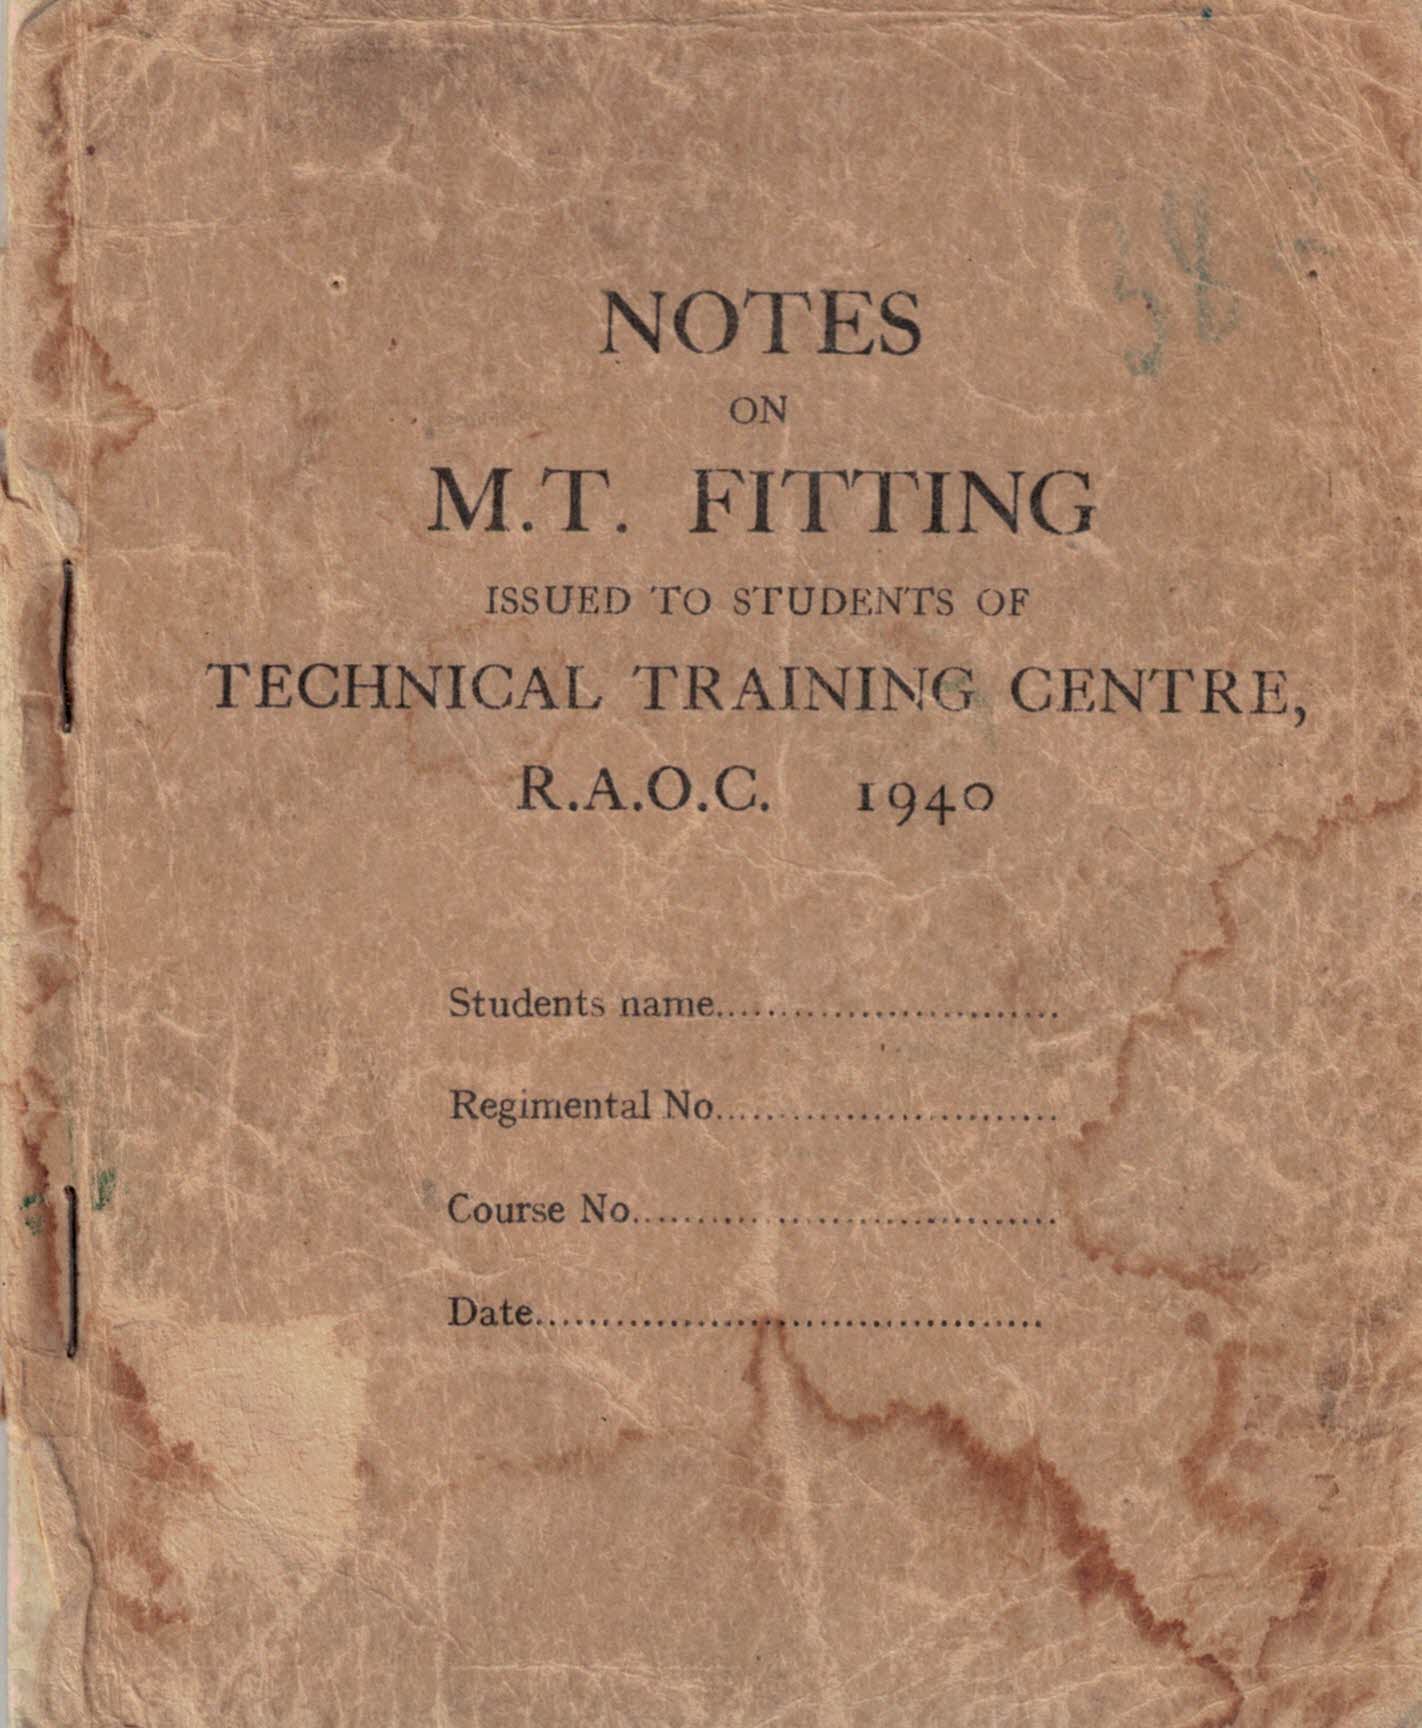 R.A.O.C - Notes on M.T. Fitting. Issued to Students of Technical Training Centre, R.A. O.C. 1940